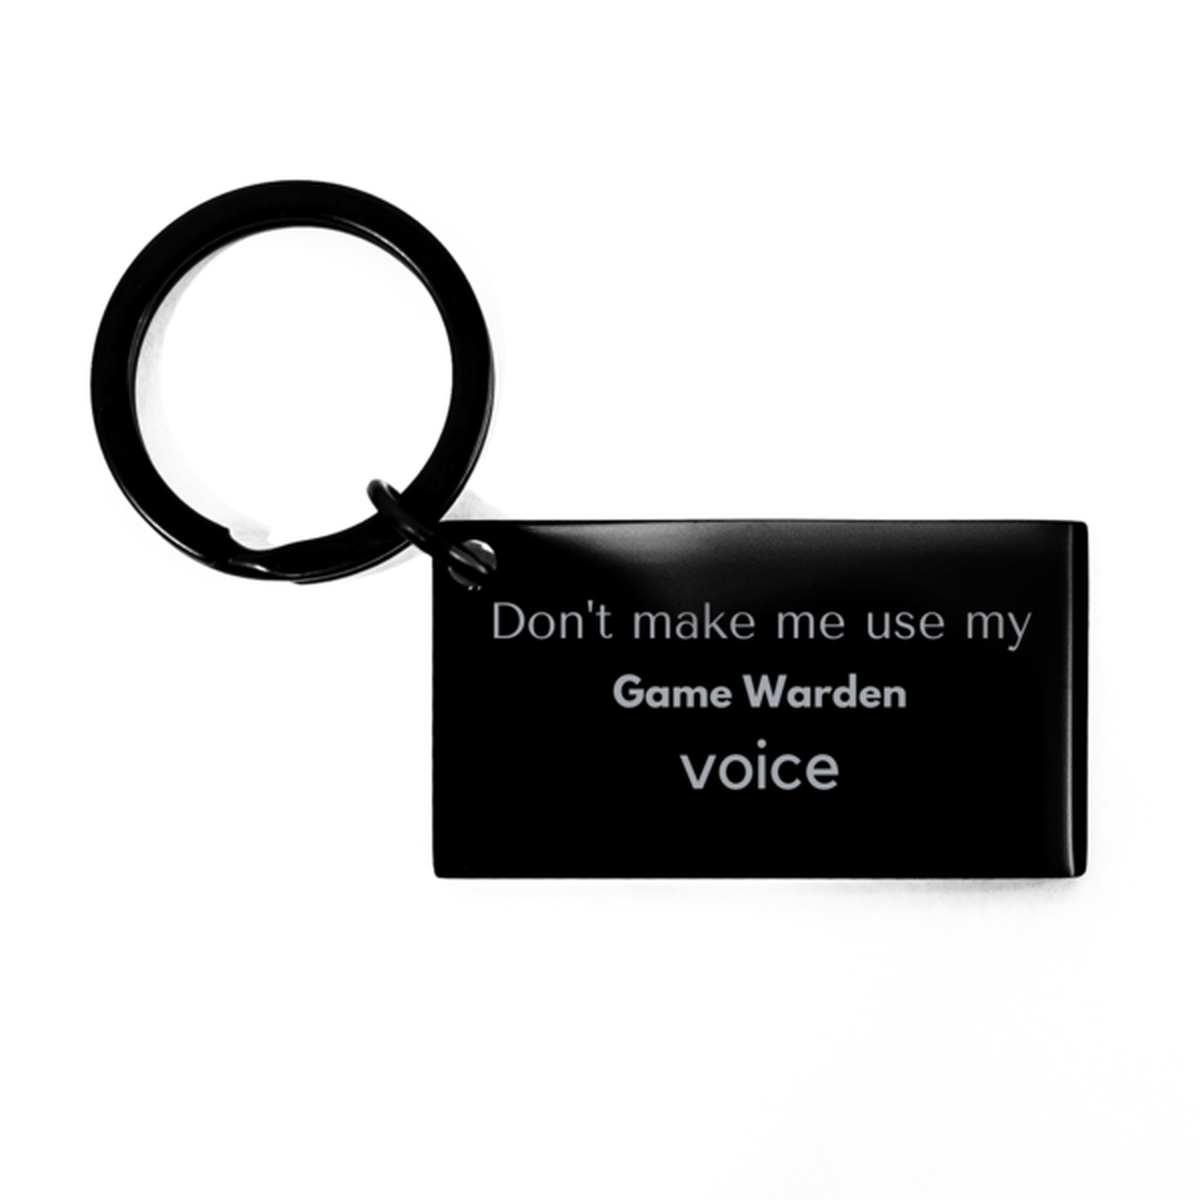 Don't make me use my Game Warden voice, Sarcasm Game Warden Gifts, Christmas Game Warden Keychain Birthday Unique Gifts For Game Warden Coworkers, Men, Women, Colleague, Friends